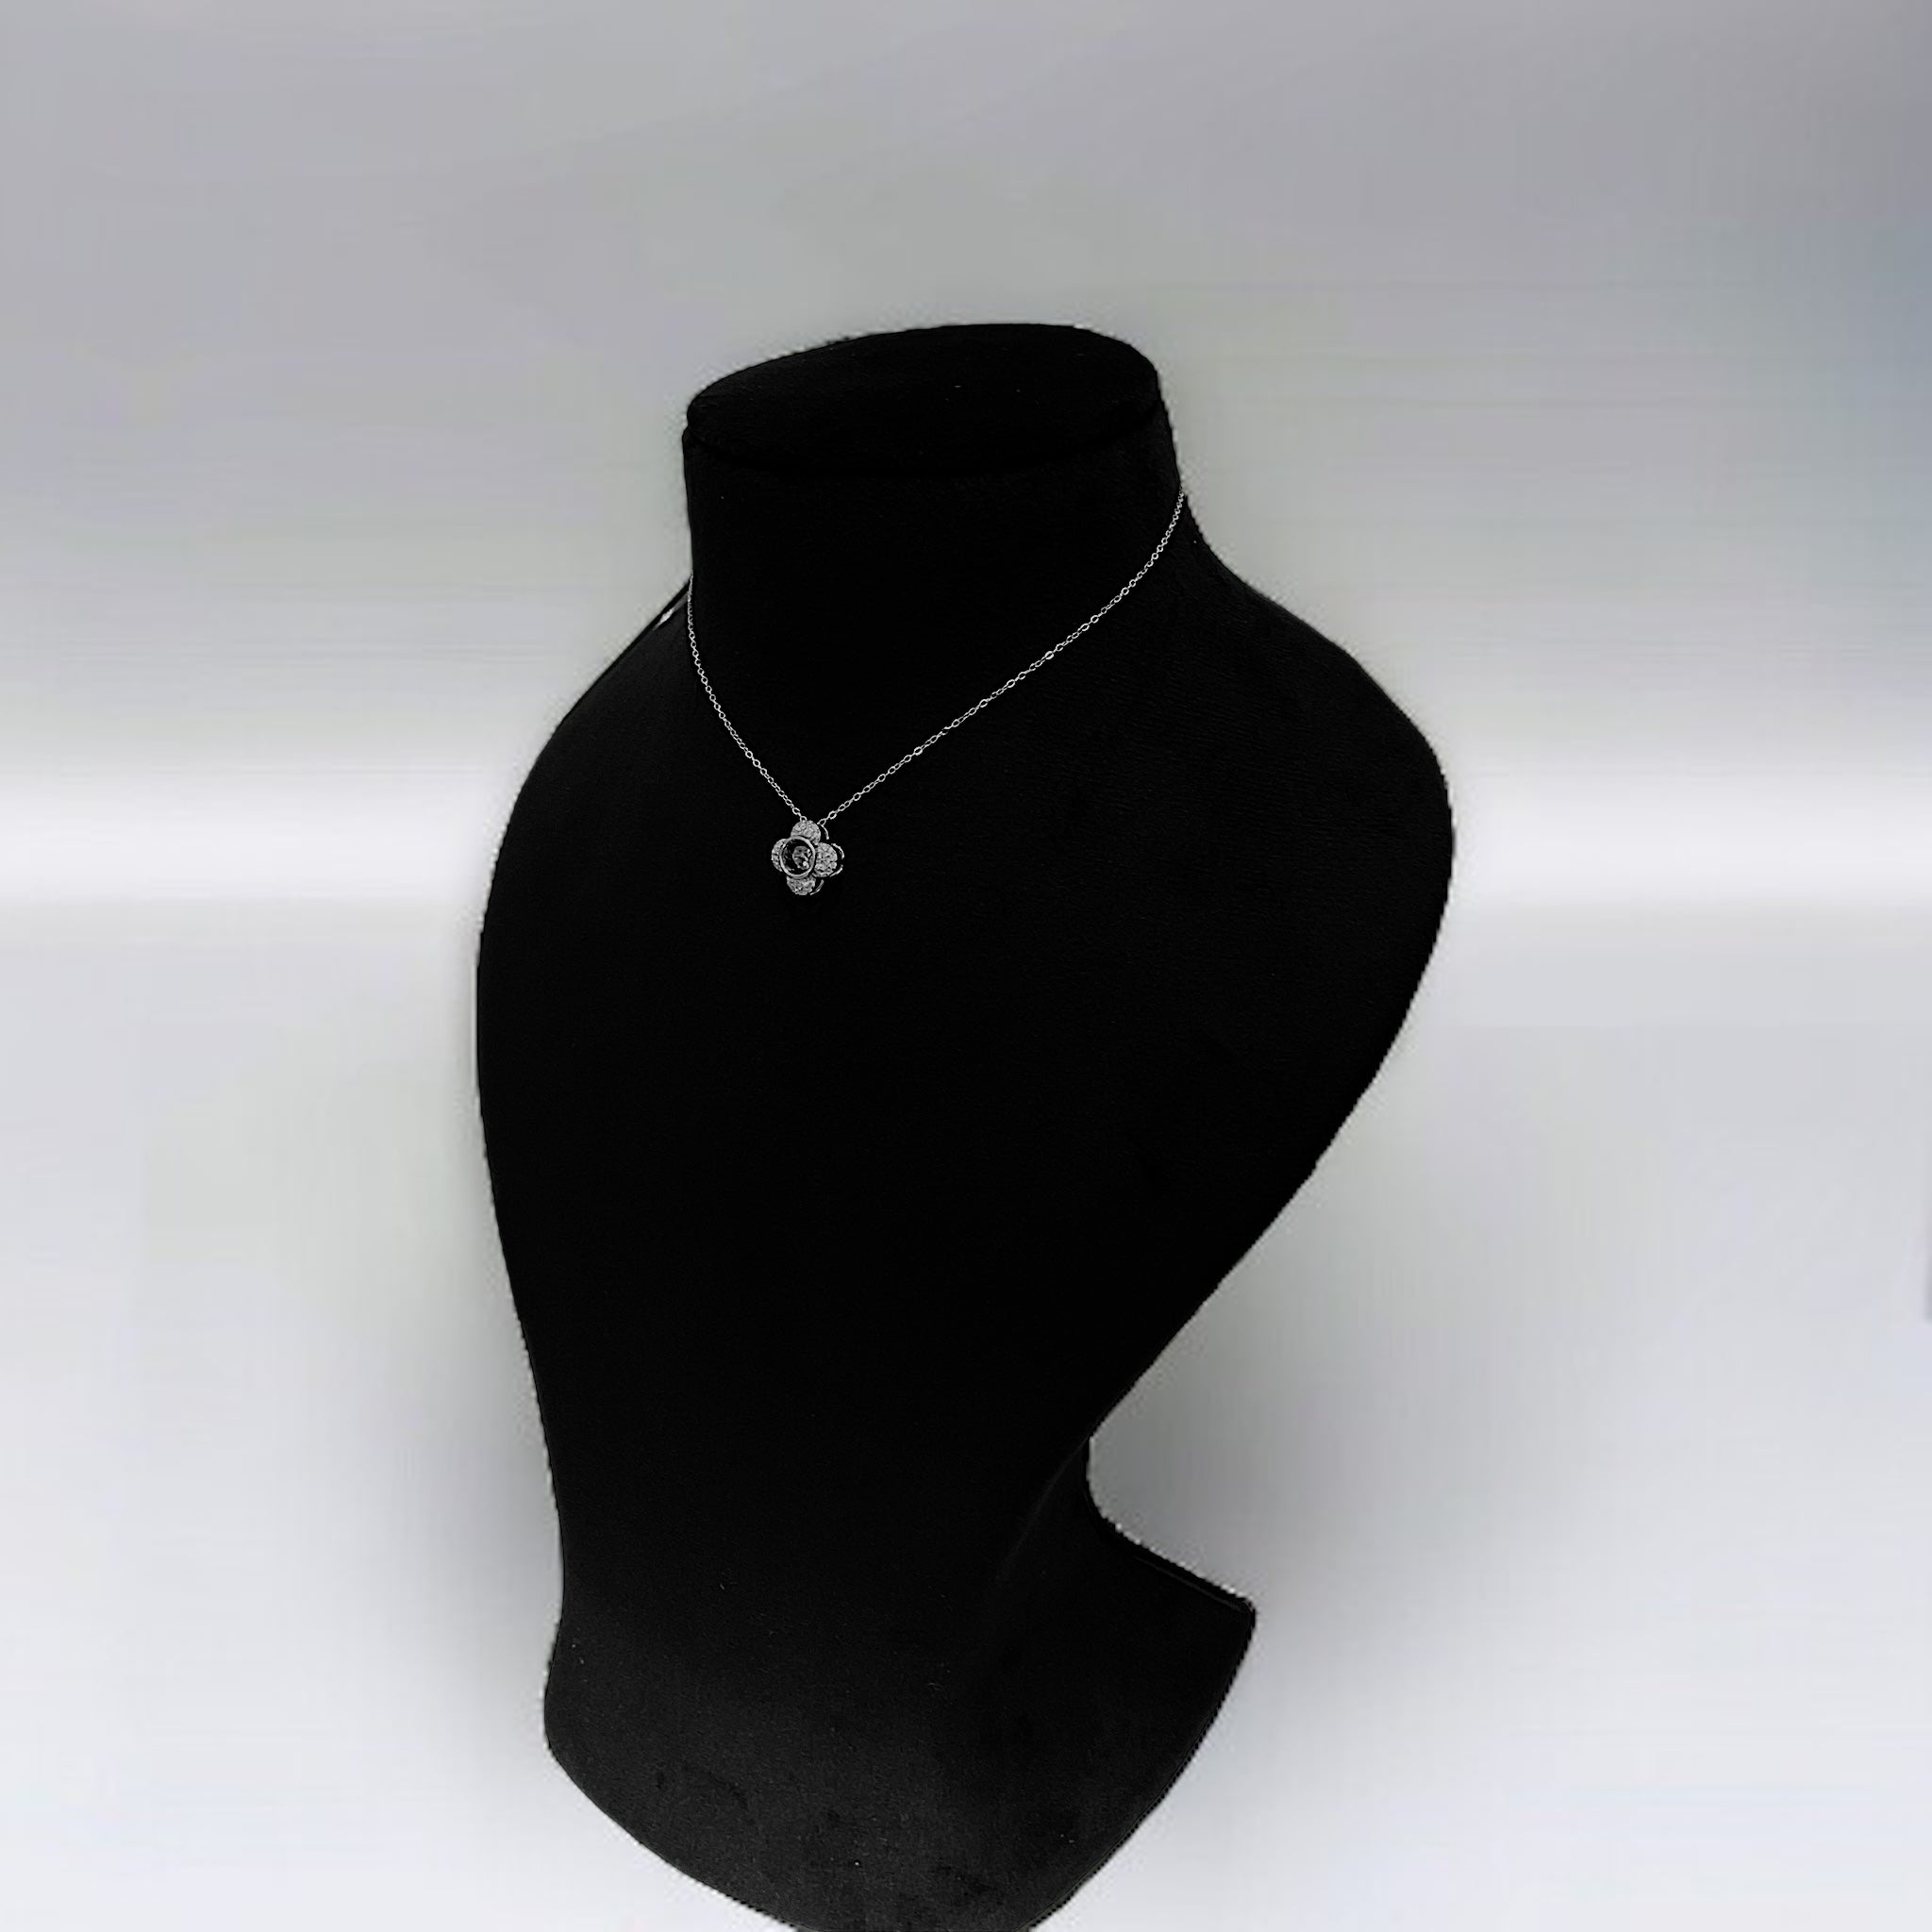 a black mannequin with a necklace on it